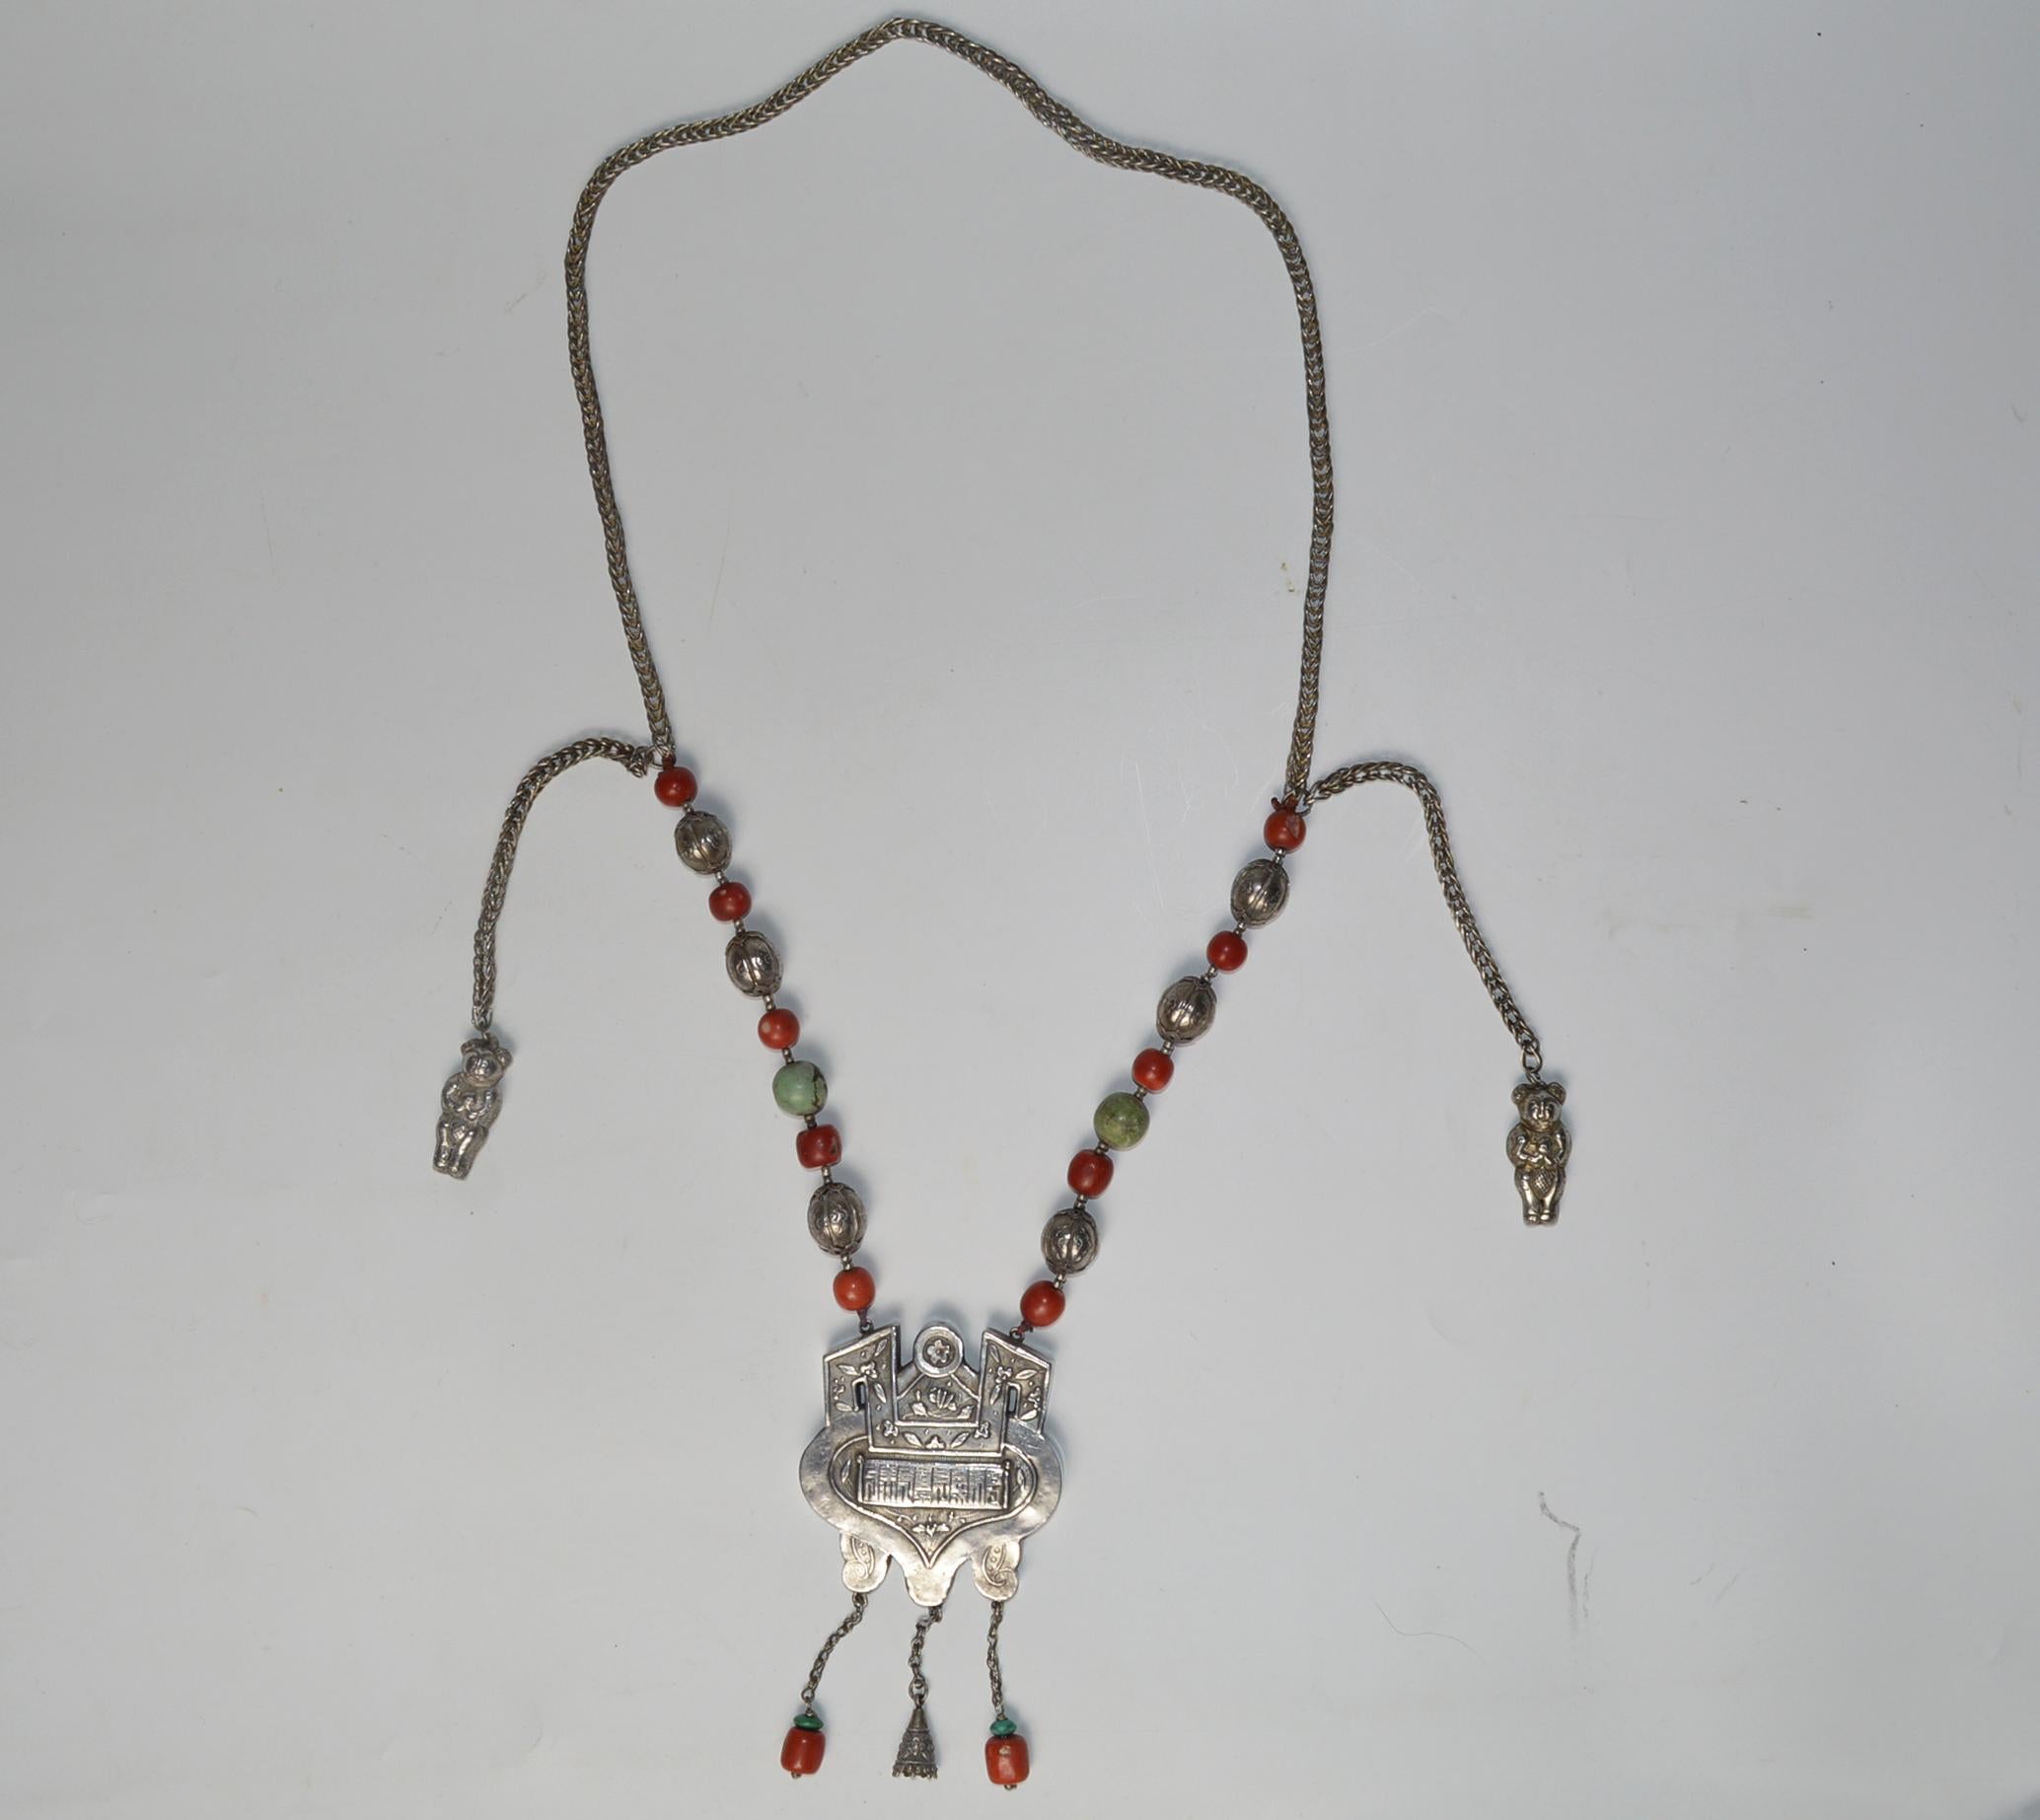 A fine Chinese antique silver necklace with antique red coral beads with turquoise and malachite
with cute small bear danglers
Yunnan Qing period 19th century
Nice wearable antique piece in fine condition
Size 36 cm, 14 inches drop down, 58 cm,